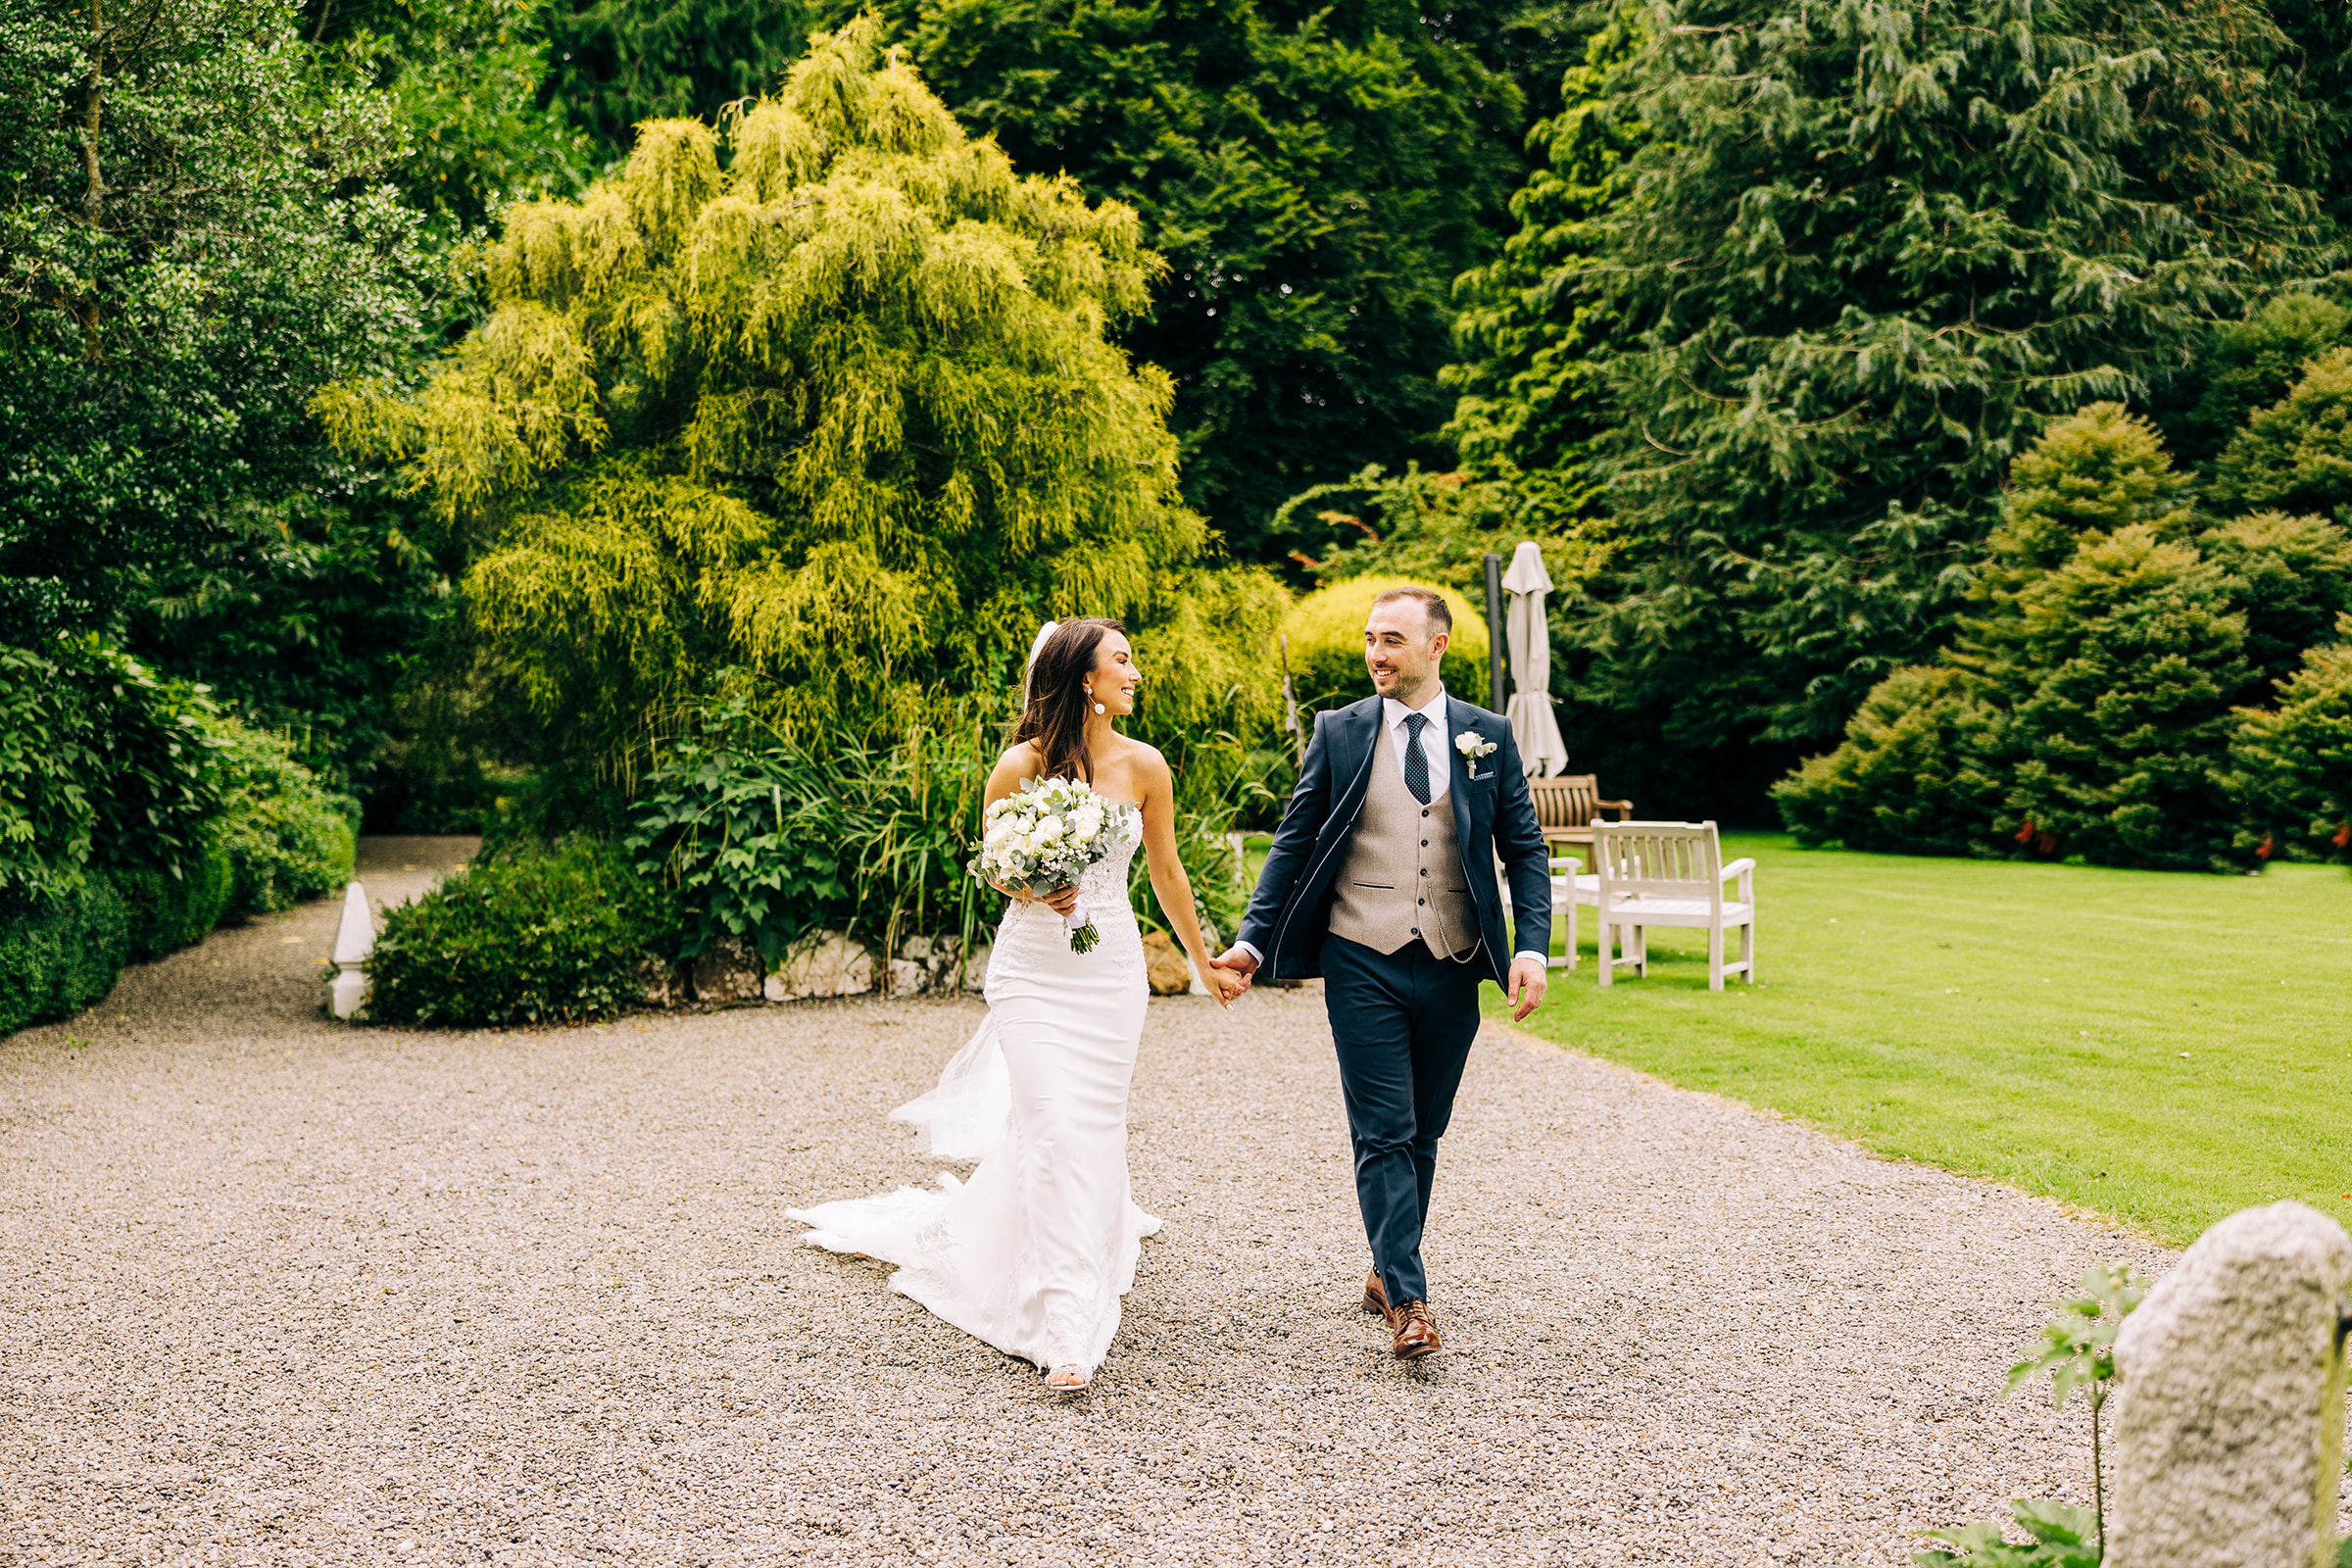 Newly married couple in Rathsallagh House gardens